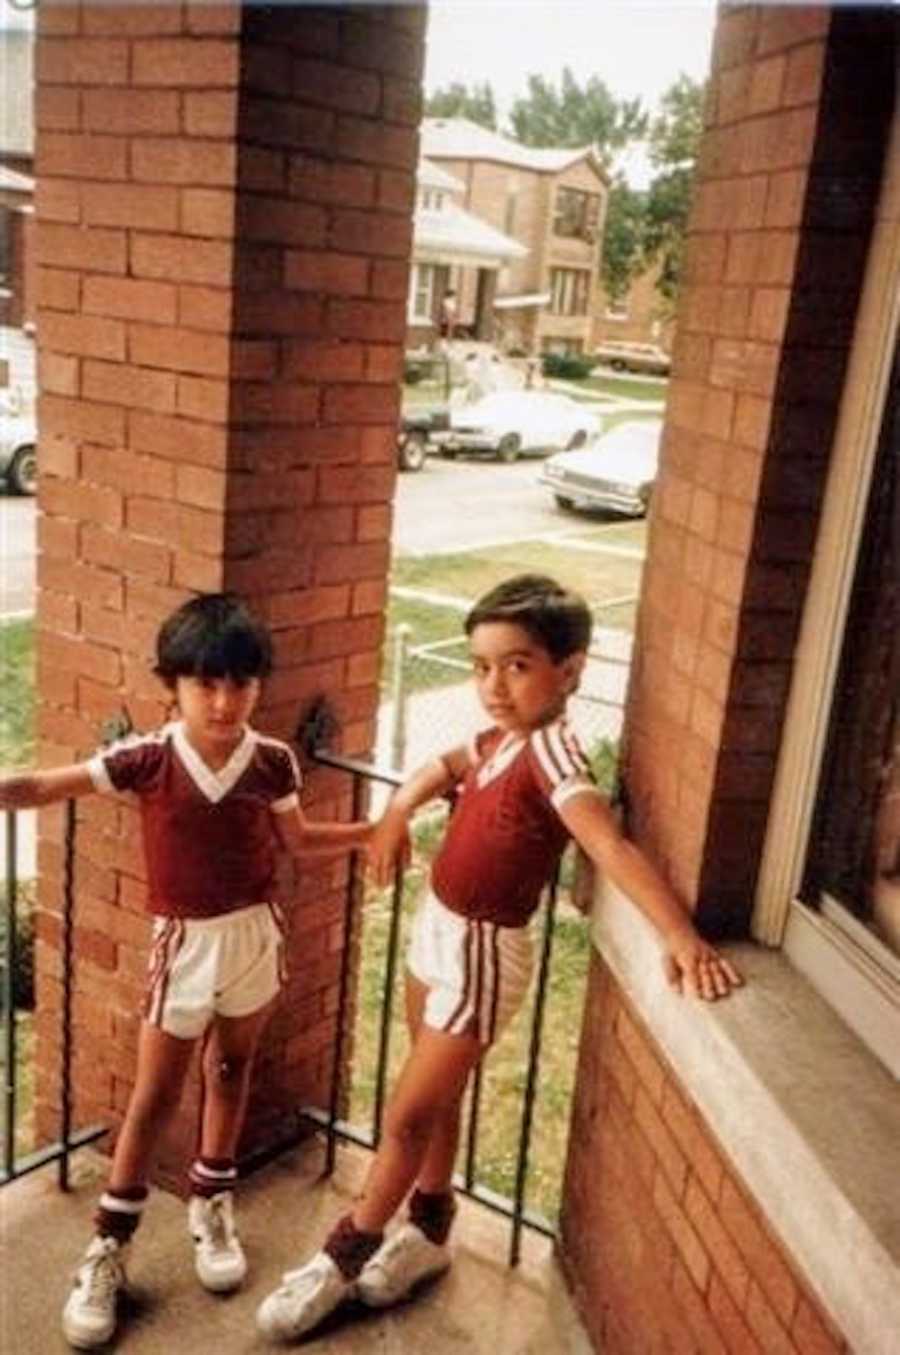 Little boys stand on front porch of home in Chicago in soccer uniforms